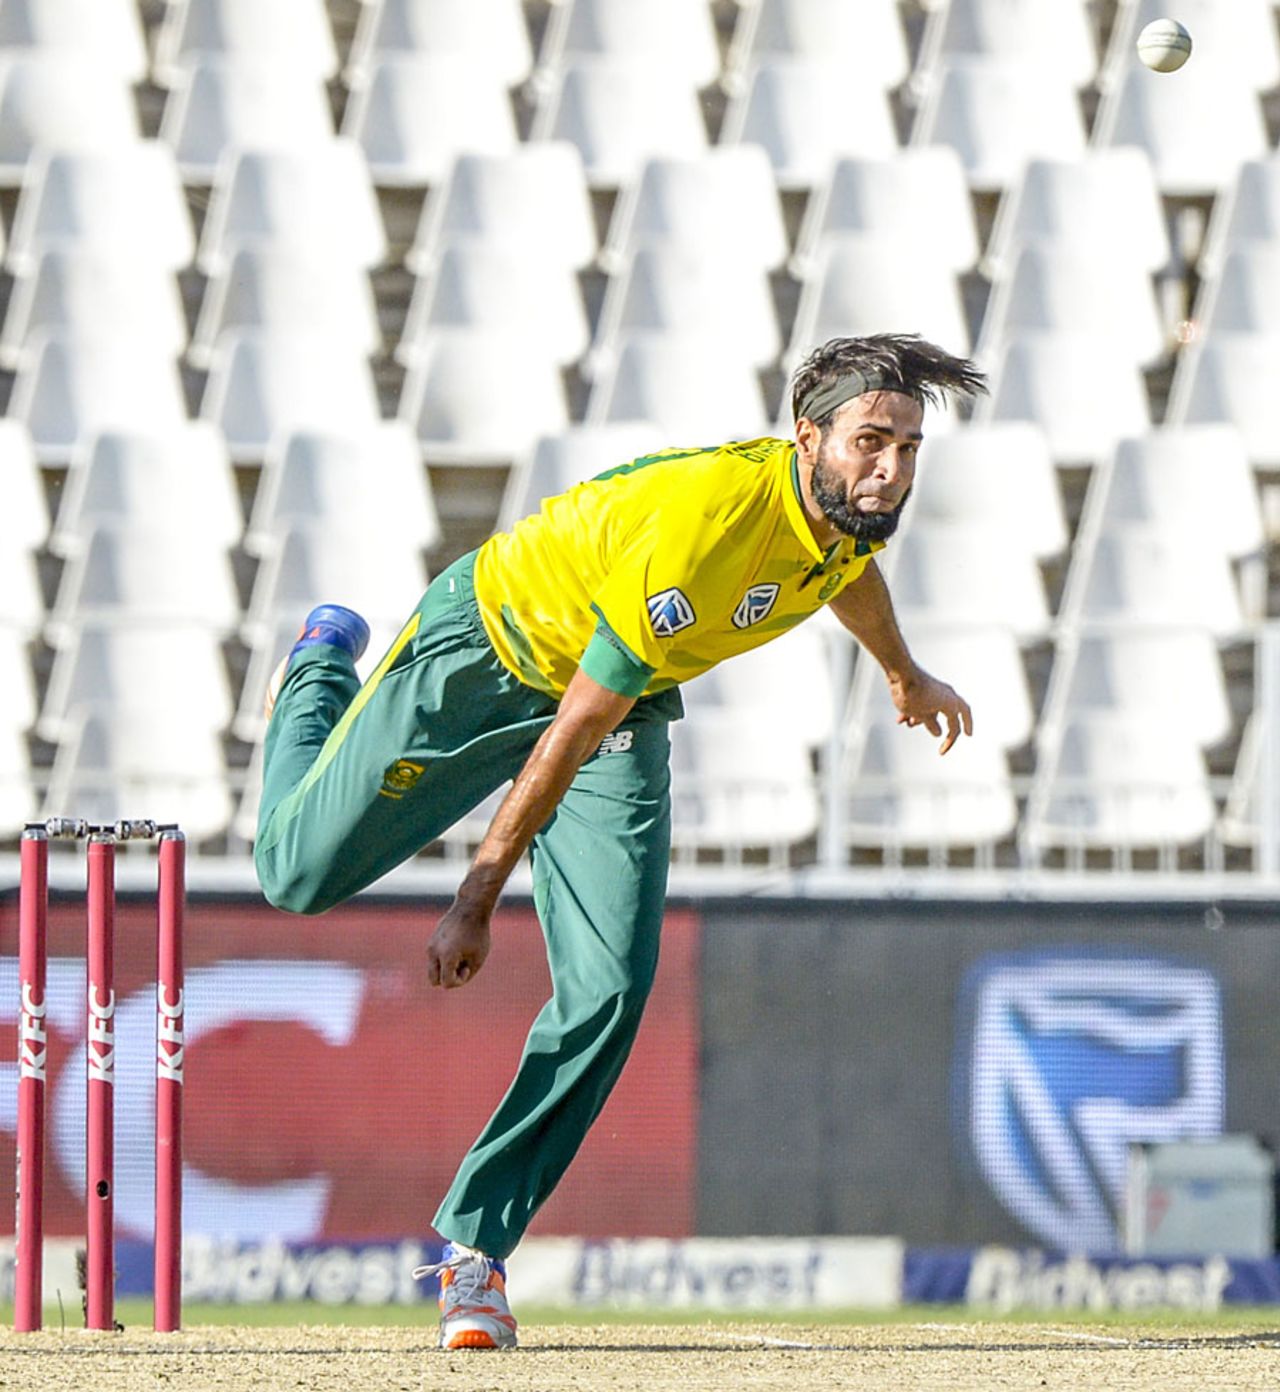 Imran Tahir almost brought South Africa back into the match, South Africa v Sri Lanka, 2nd T20I, Johannesburg, January 22, 2017